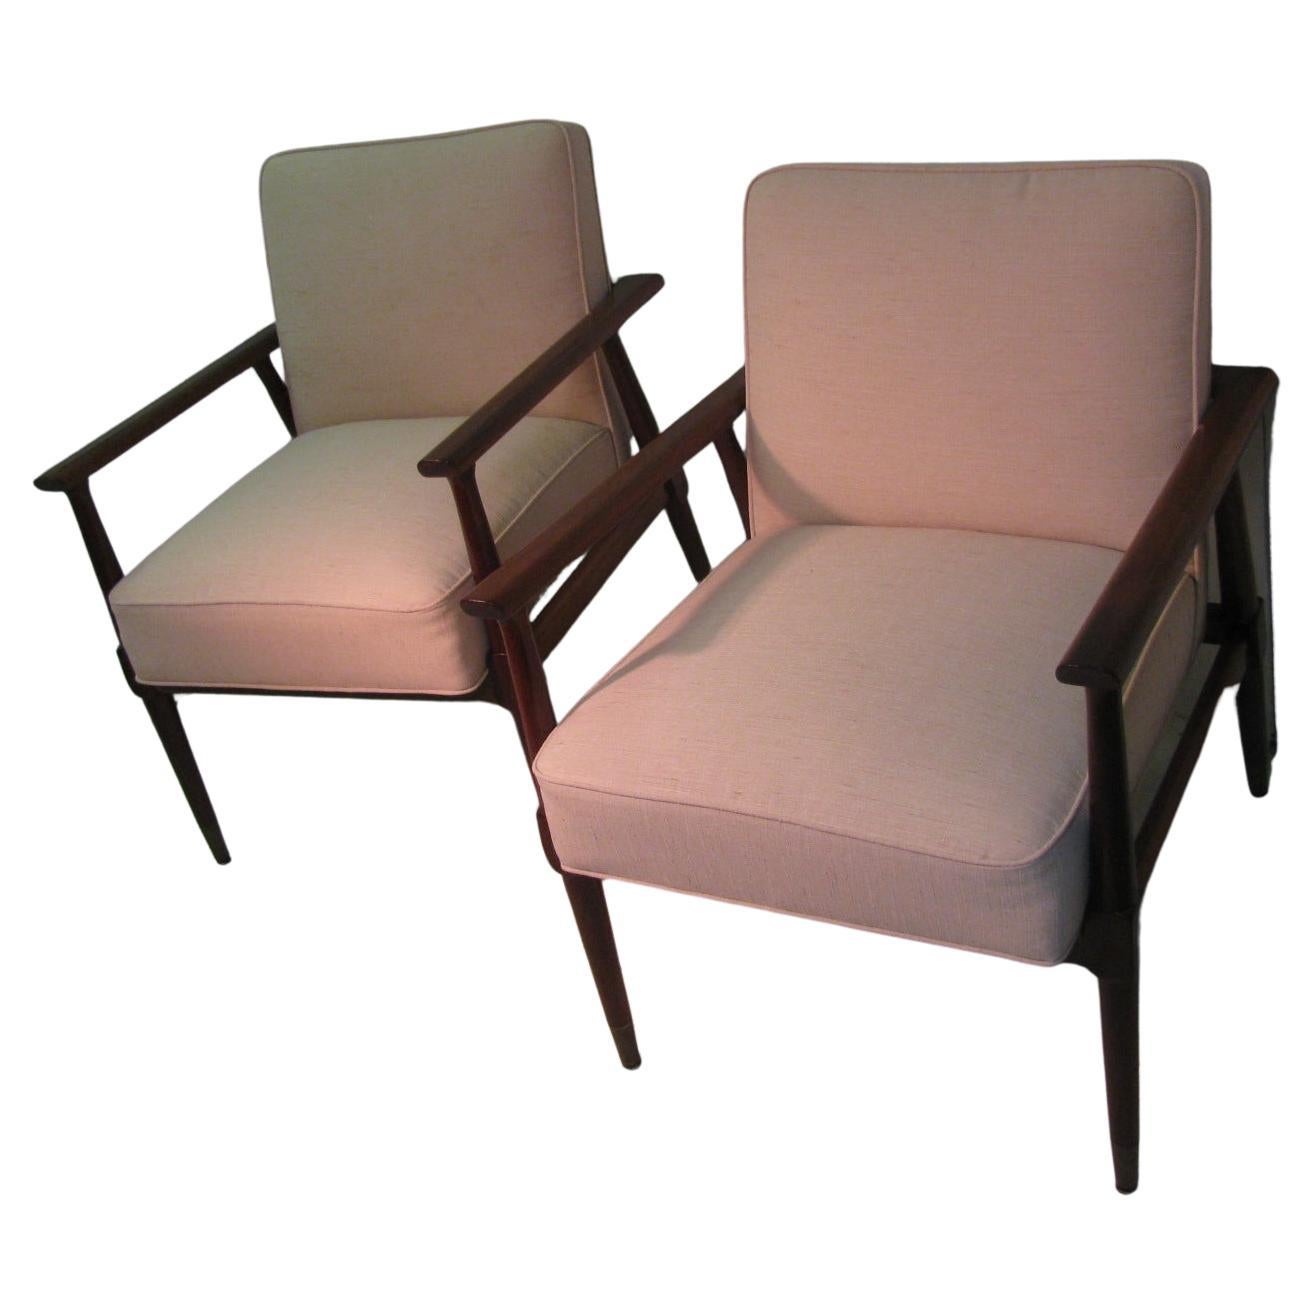 Pair of Mid-Century Modern Black Walnut Lounge Armchairs, 1957 For Sale 4